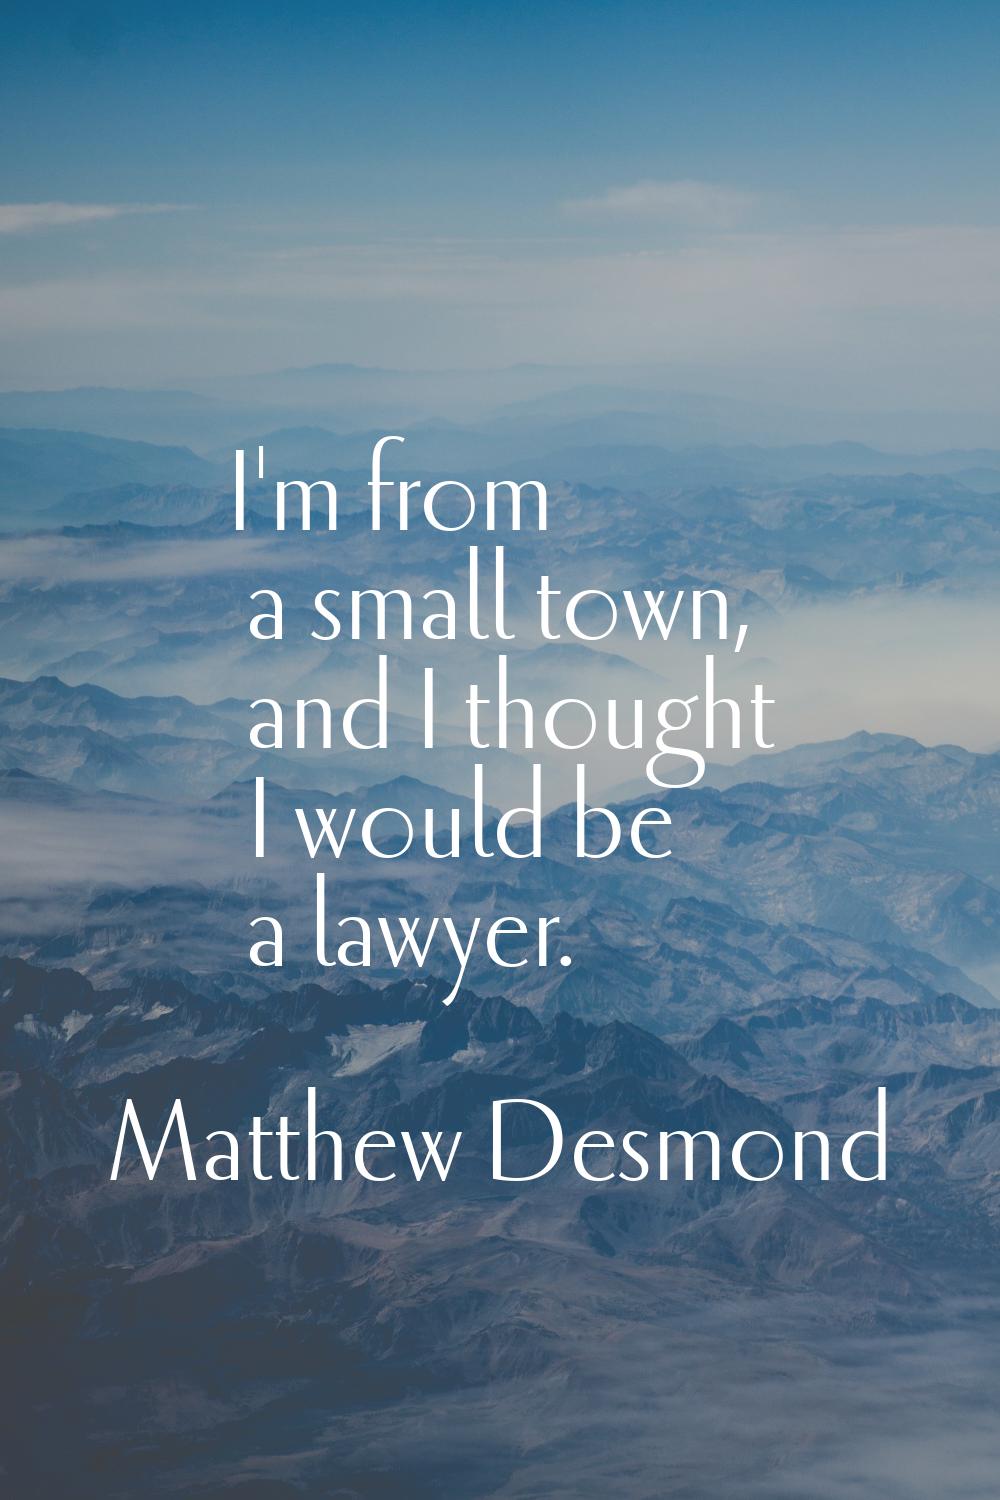 I'm from a small town, and I thought I would be a lawyer.